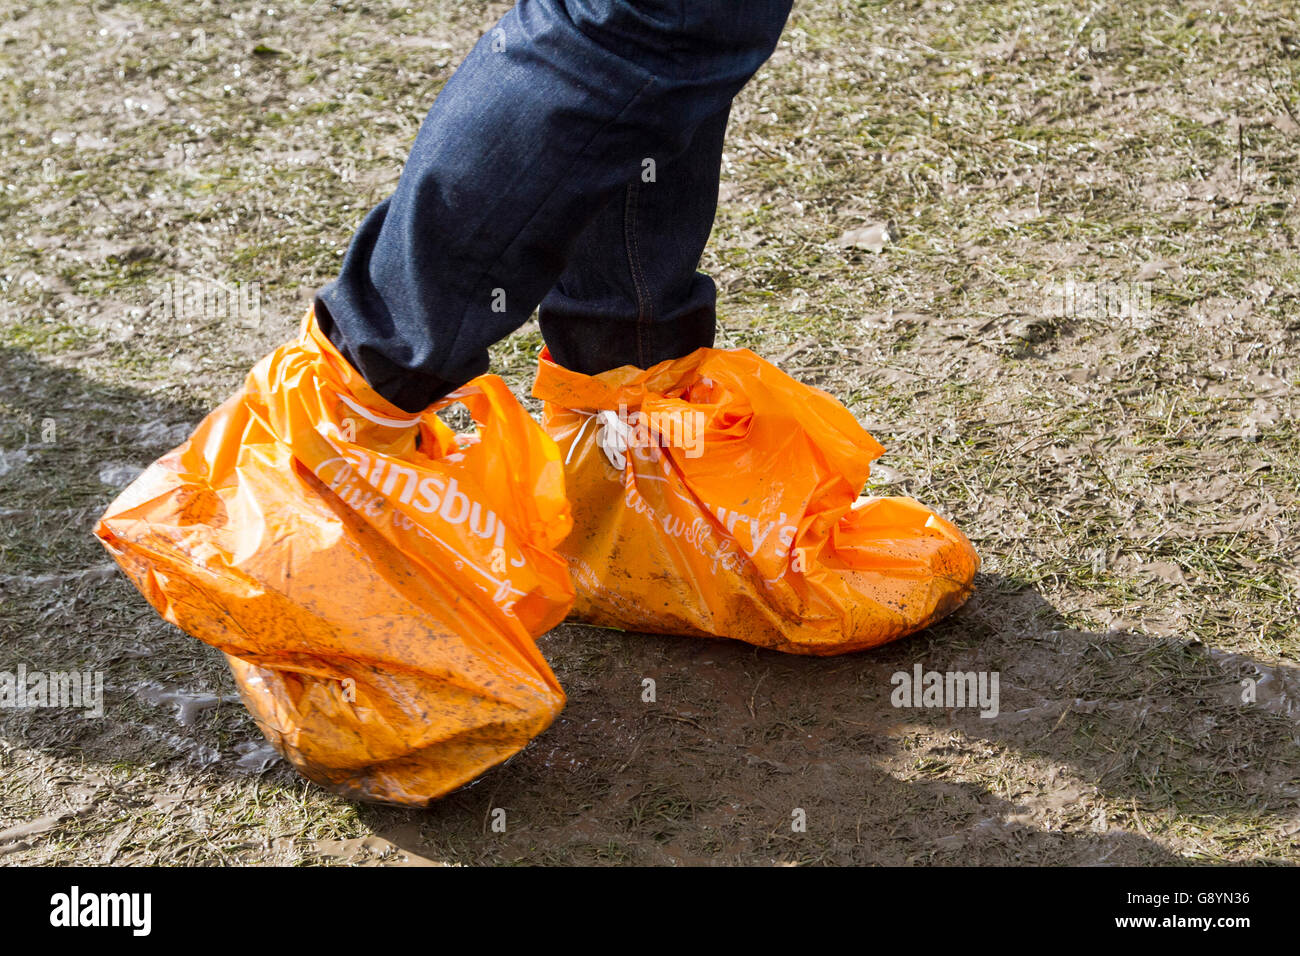 Wimbledon London,UK. 30th June 2016. A Tennis fan with feet wrapped in  plastic bags walks on muddy surface in Wimbledon Park following the rains  on Day 4 of the 2016 Wimbledon Championships